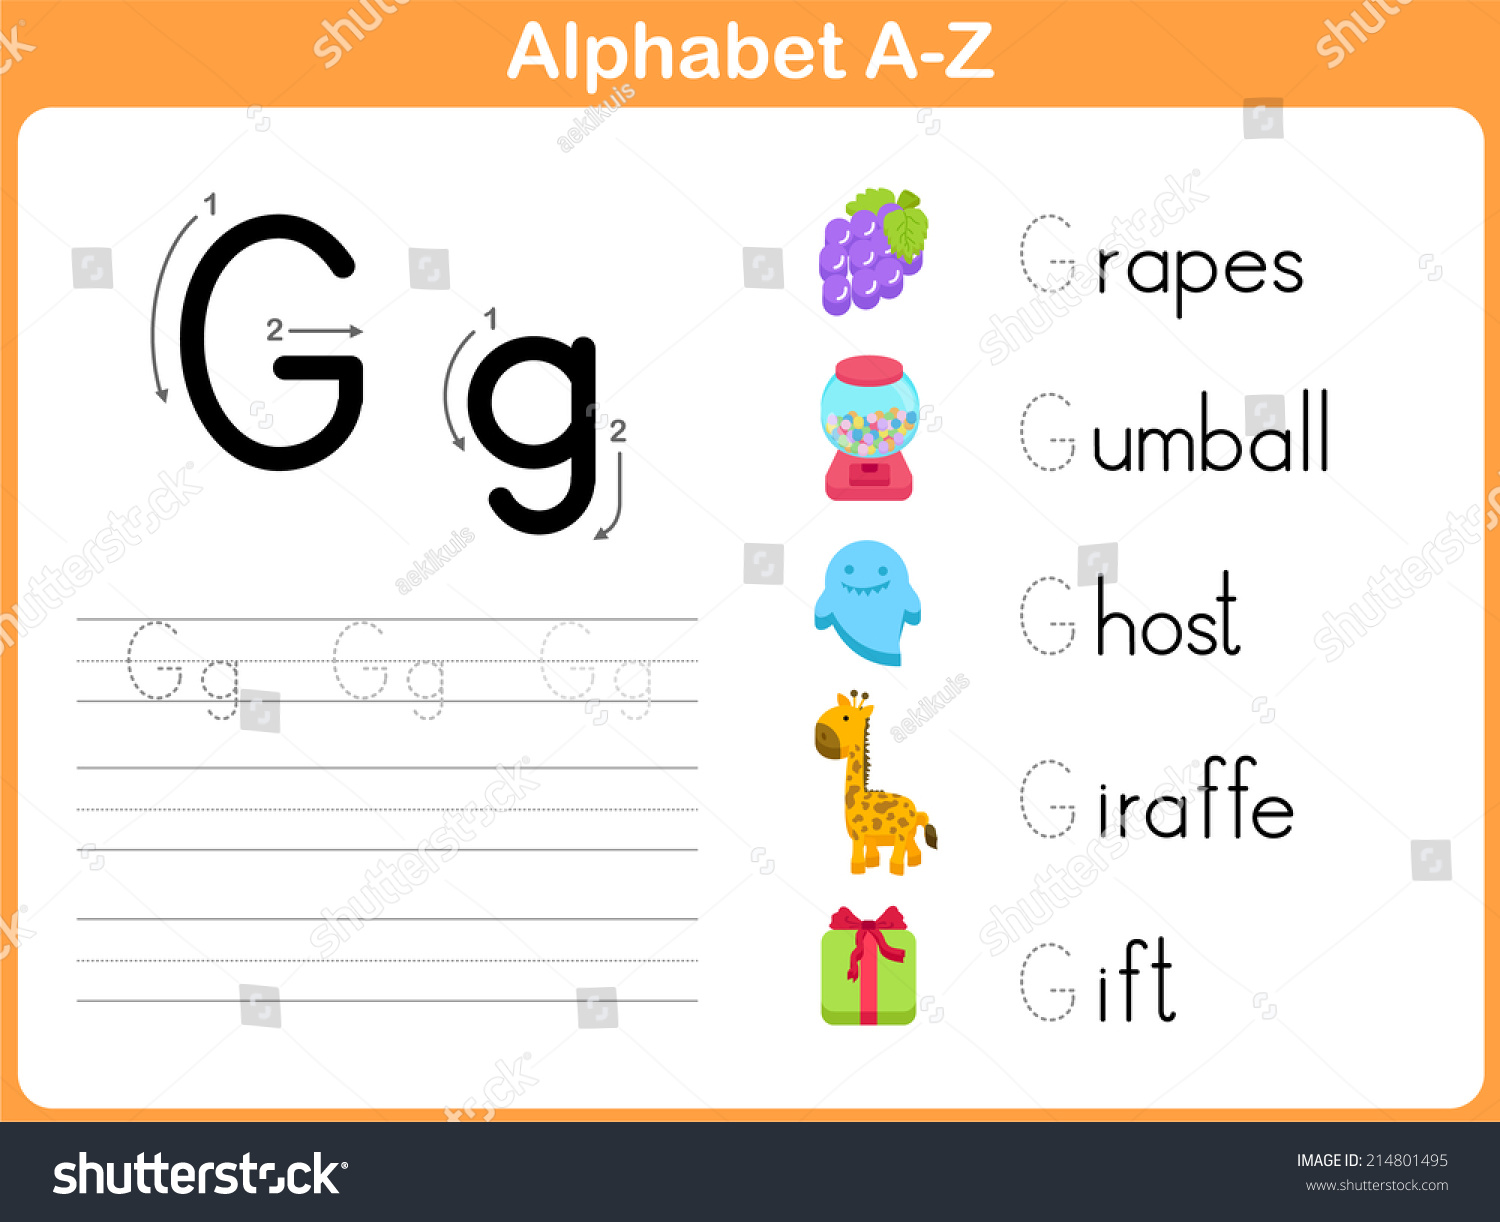 Alphabet Tracing Worksheet Writing Az Stock Vector 214801495  worksheets for teachers, printable worksheets, multiplication, free worksheets, and math worksheets Tracing Letters A Z Worksheet 1222 x 1500